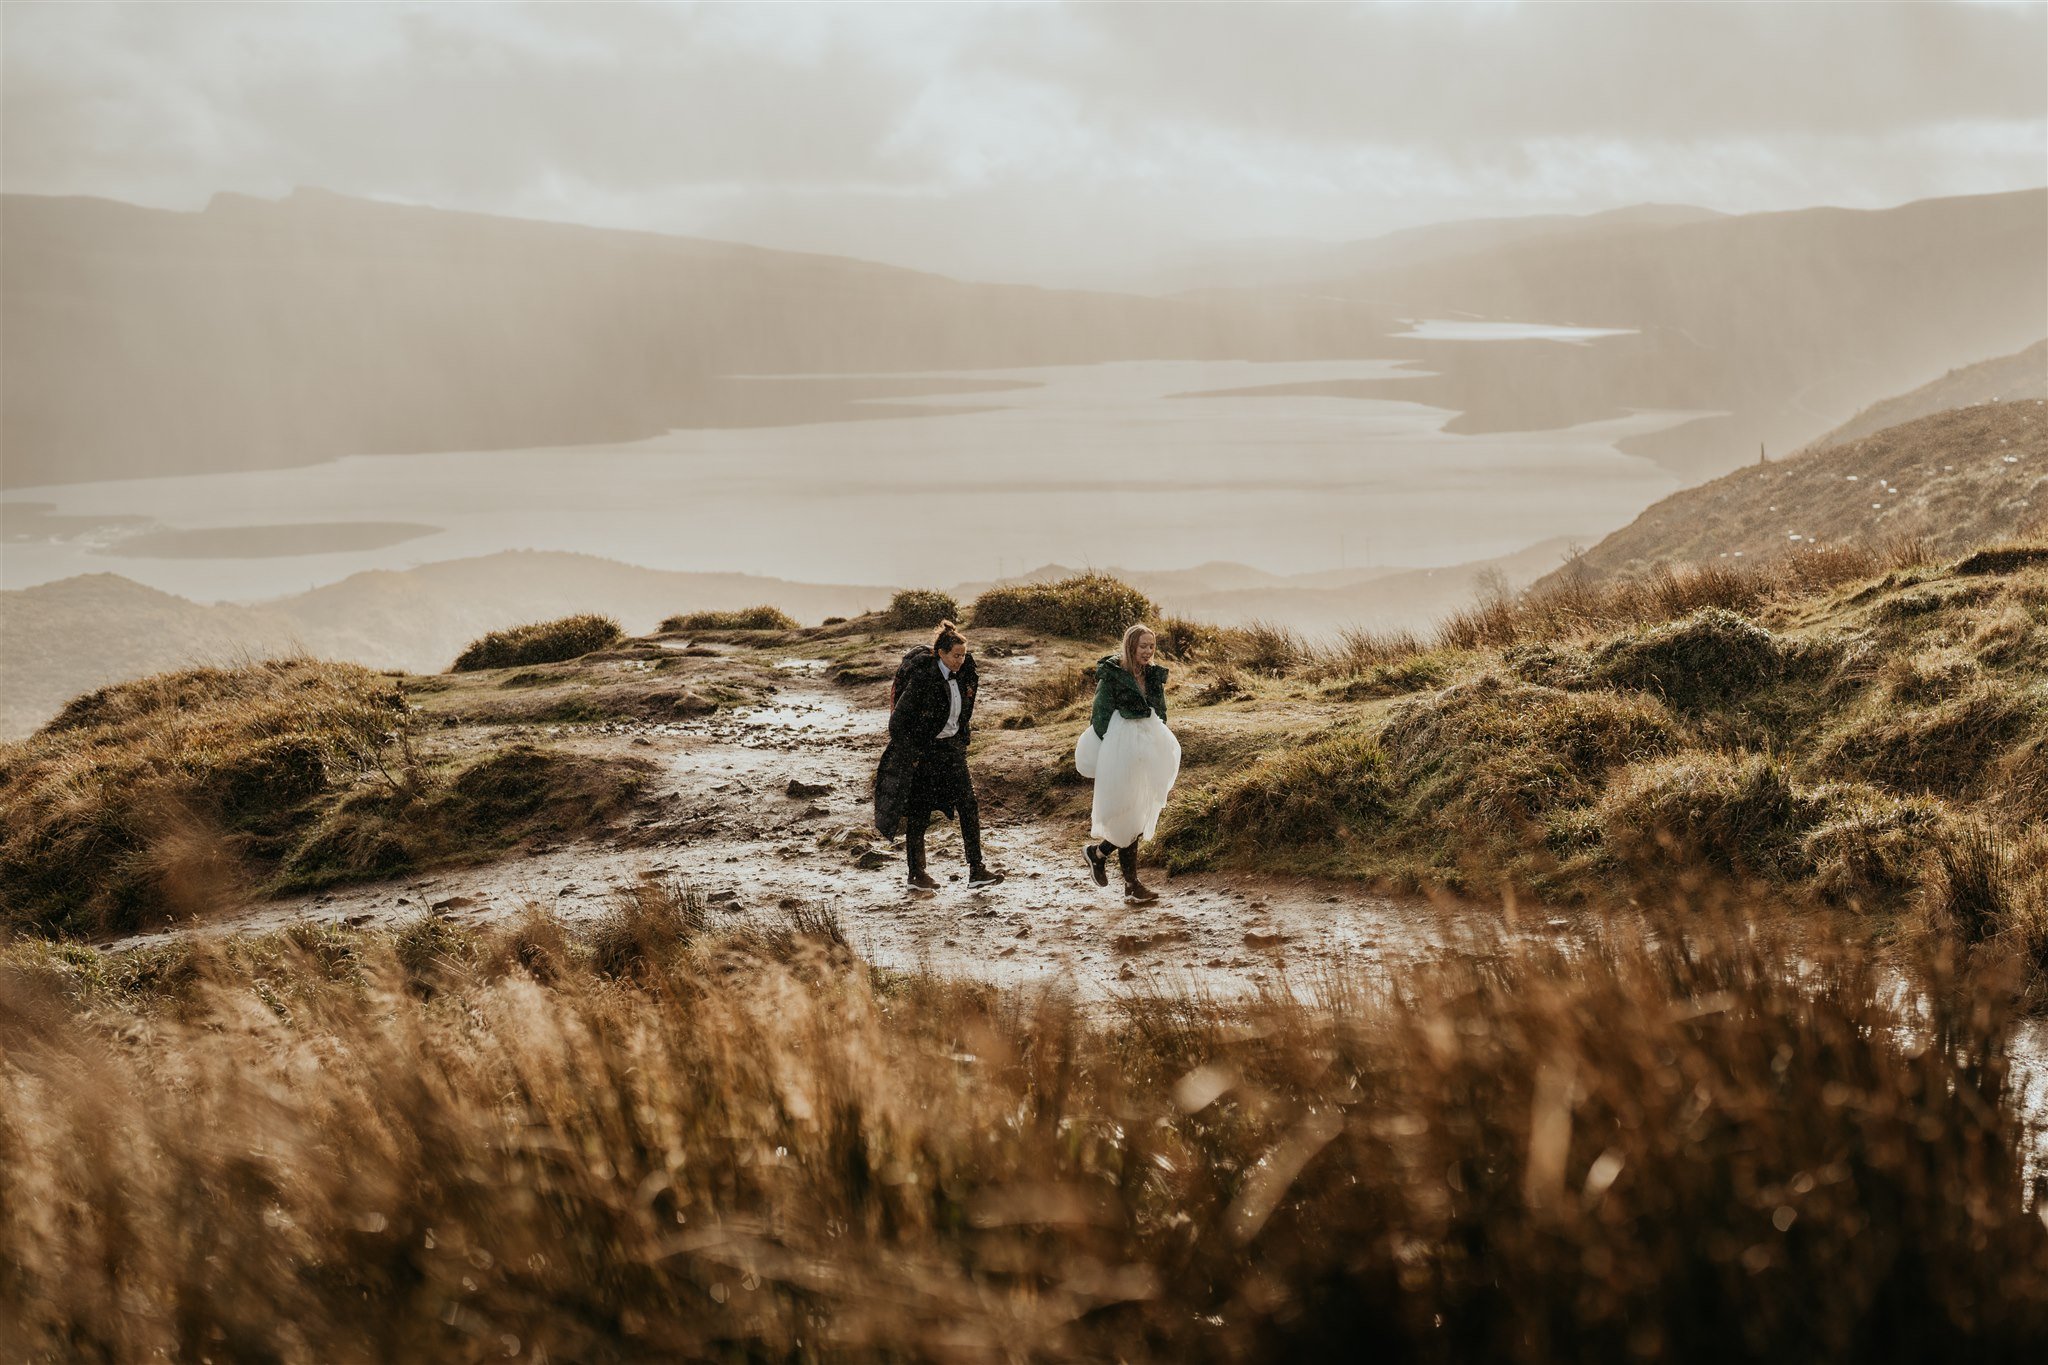 Brides hike through a muddy trail to their Isle of Skye elopement location